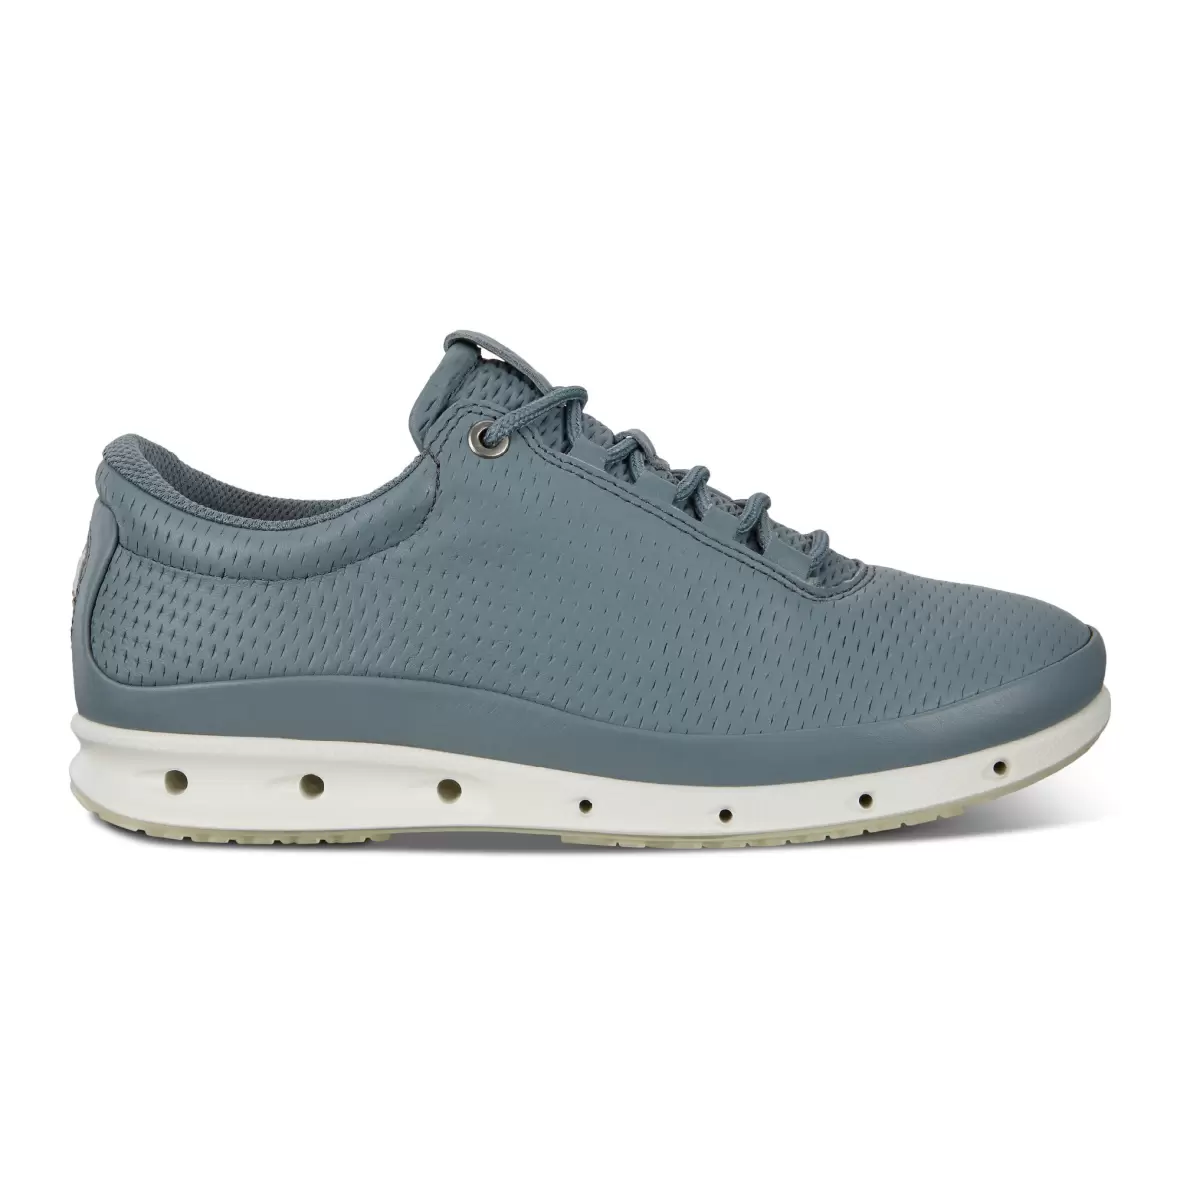 Ensomhed Virus erosion Ecco Cool 831403-01287 Dame sneakers